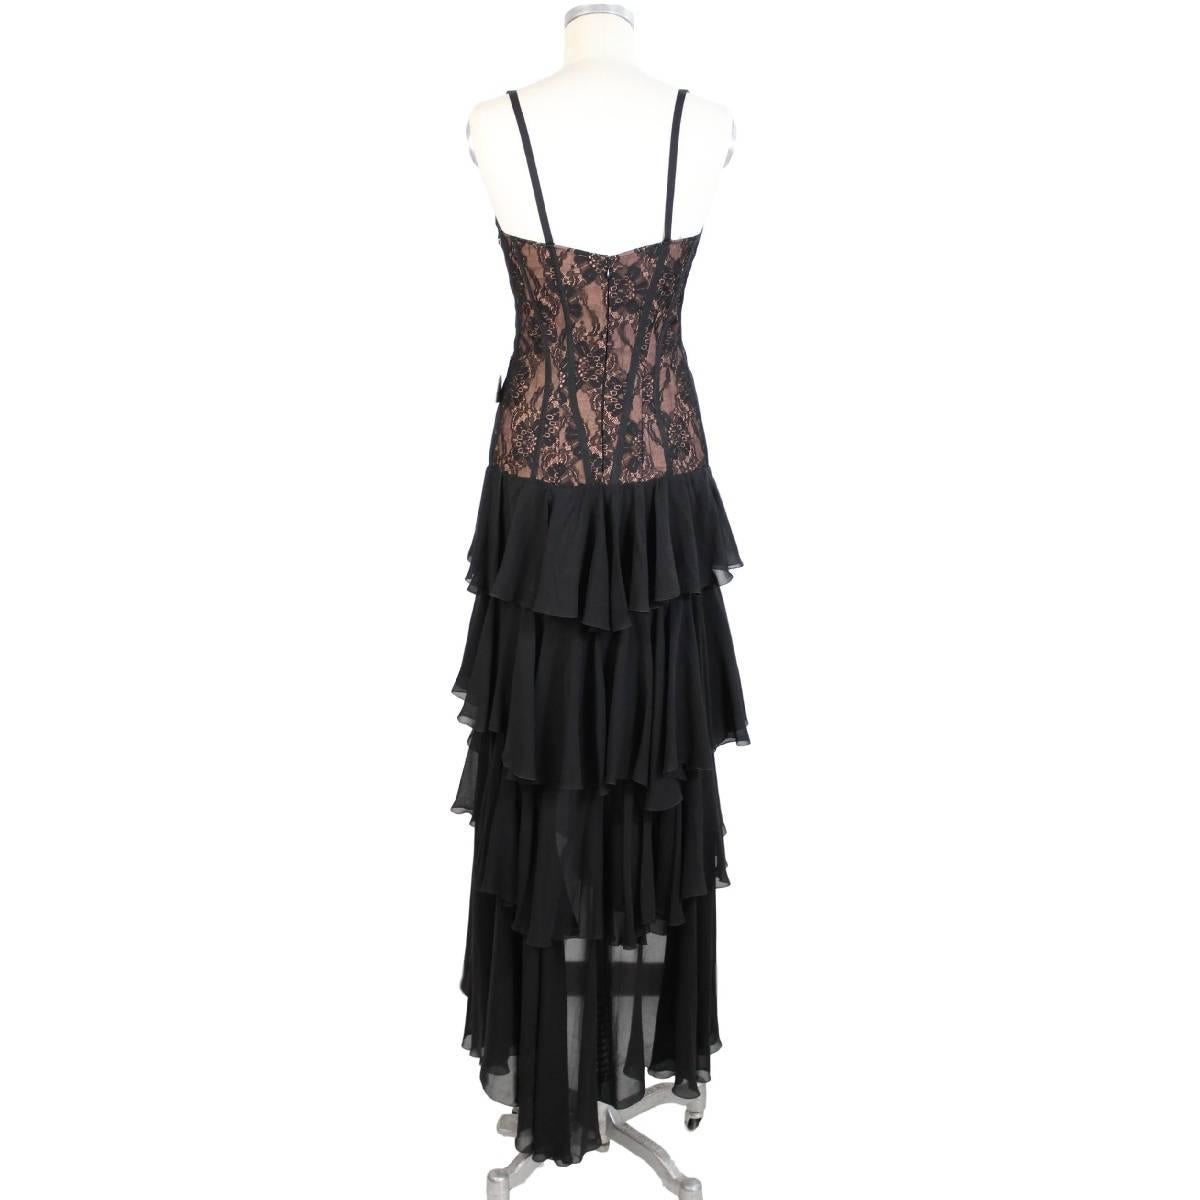 Black Gai Mattiolo silk black lace cocktail dress size 42 it made italy new with tag